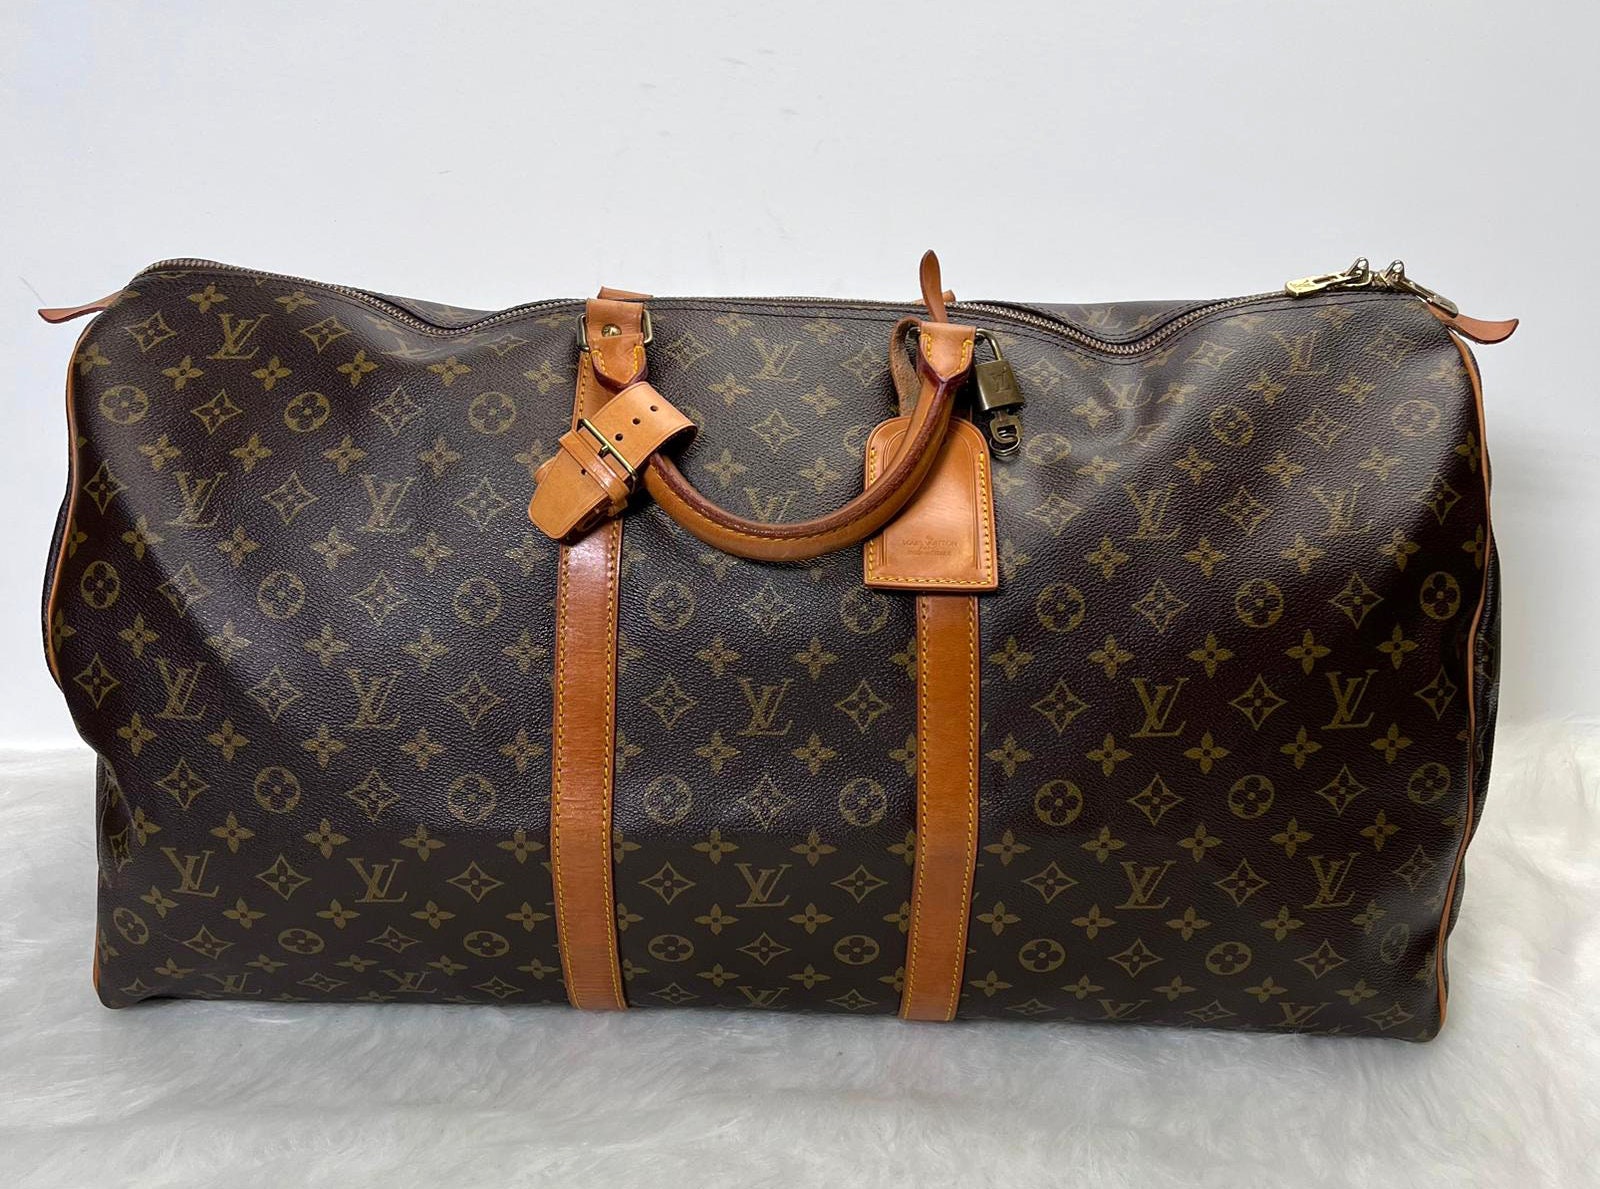 Louis Vuitton America's Cup Duffle Travel Overnight Bag LV-1118P